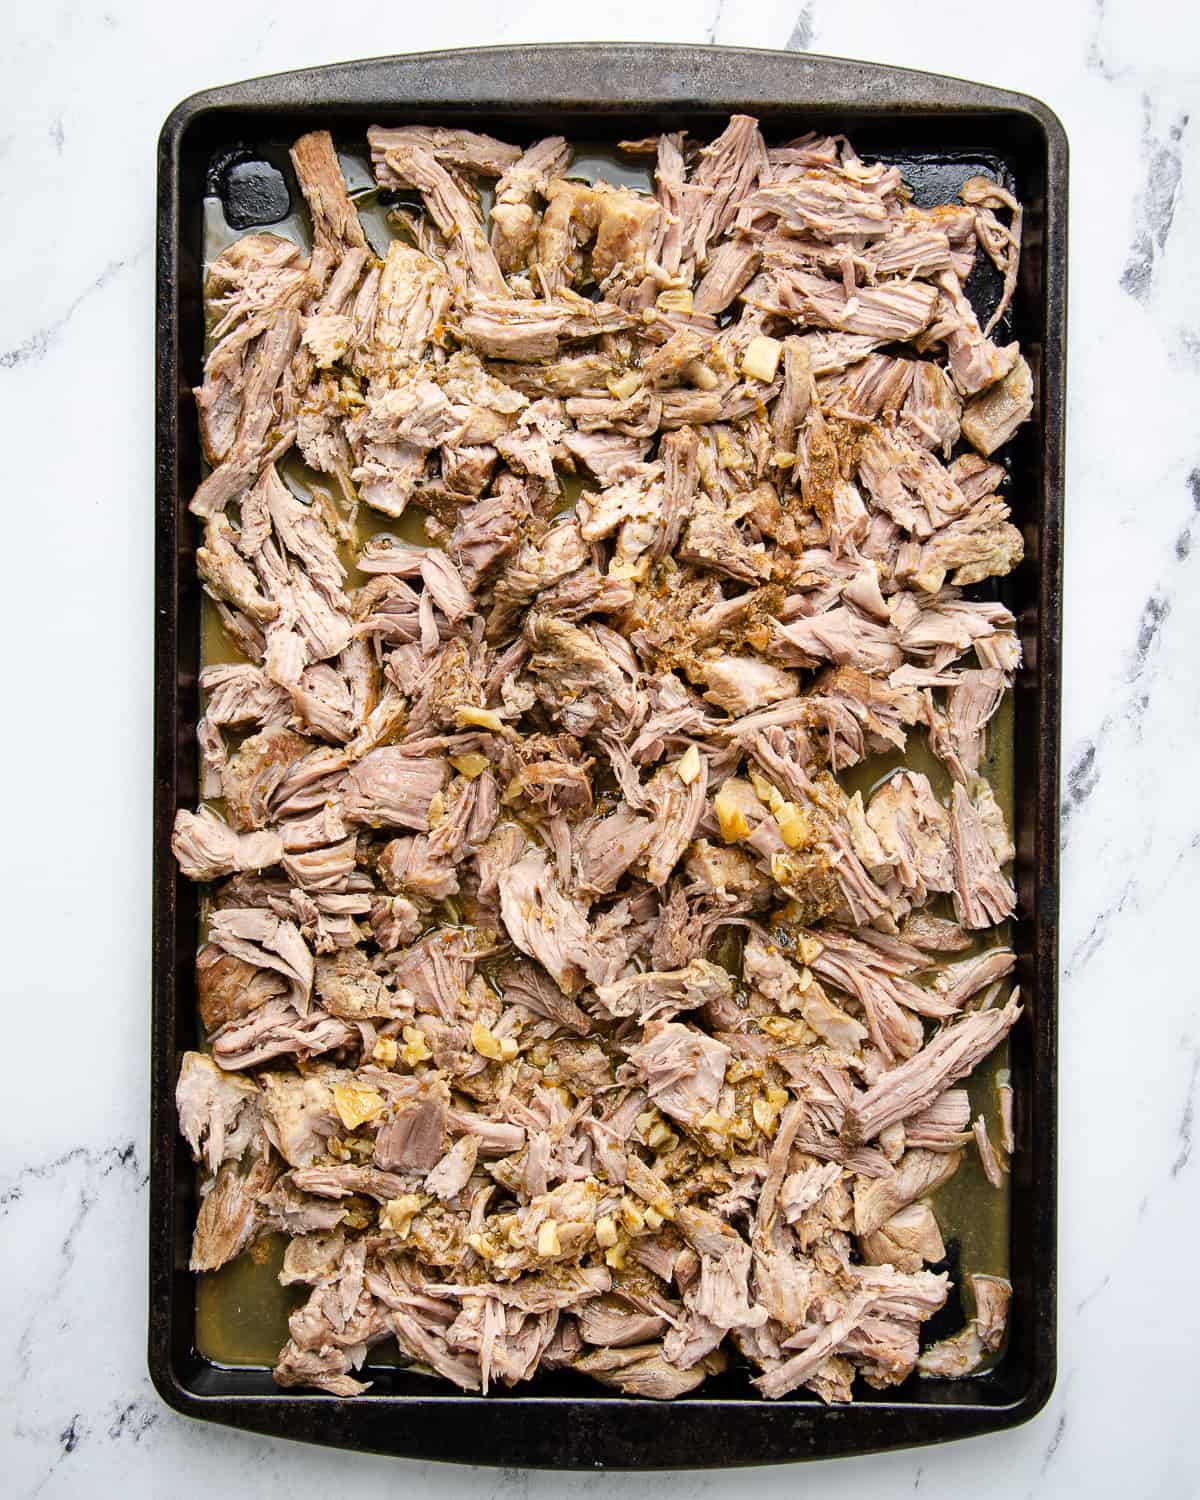 The shredded carnitas on a sheet tray covered in the cooking sauce.